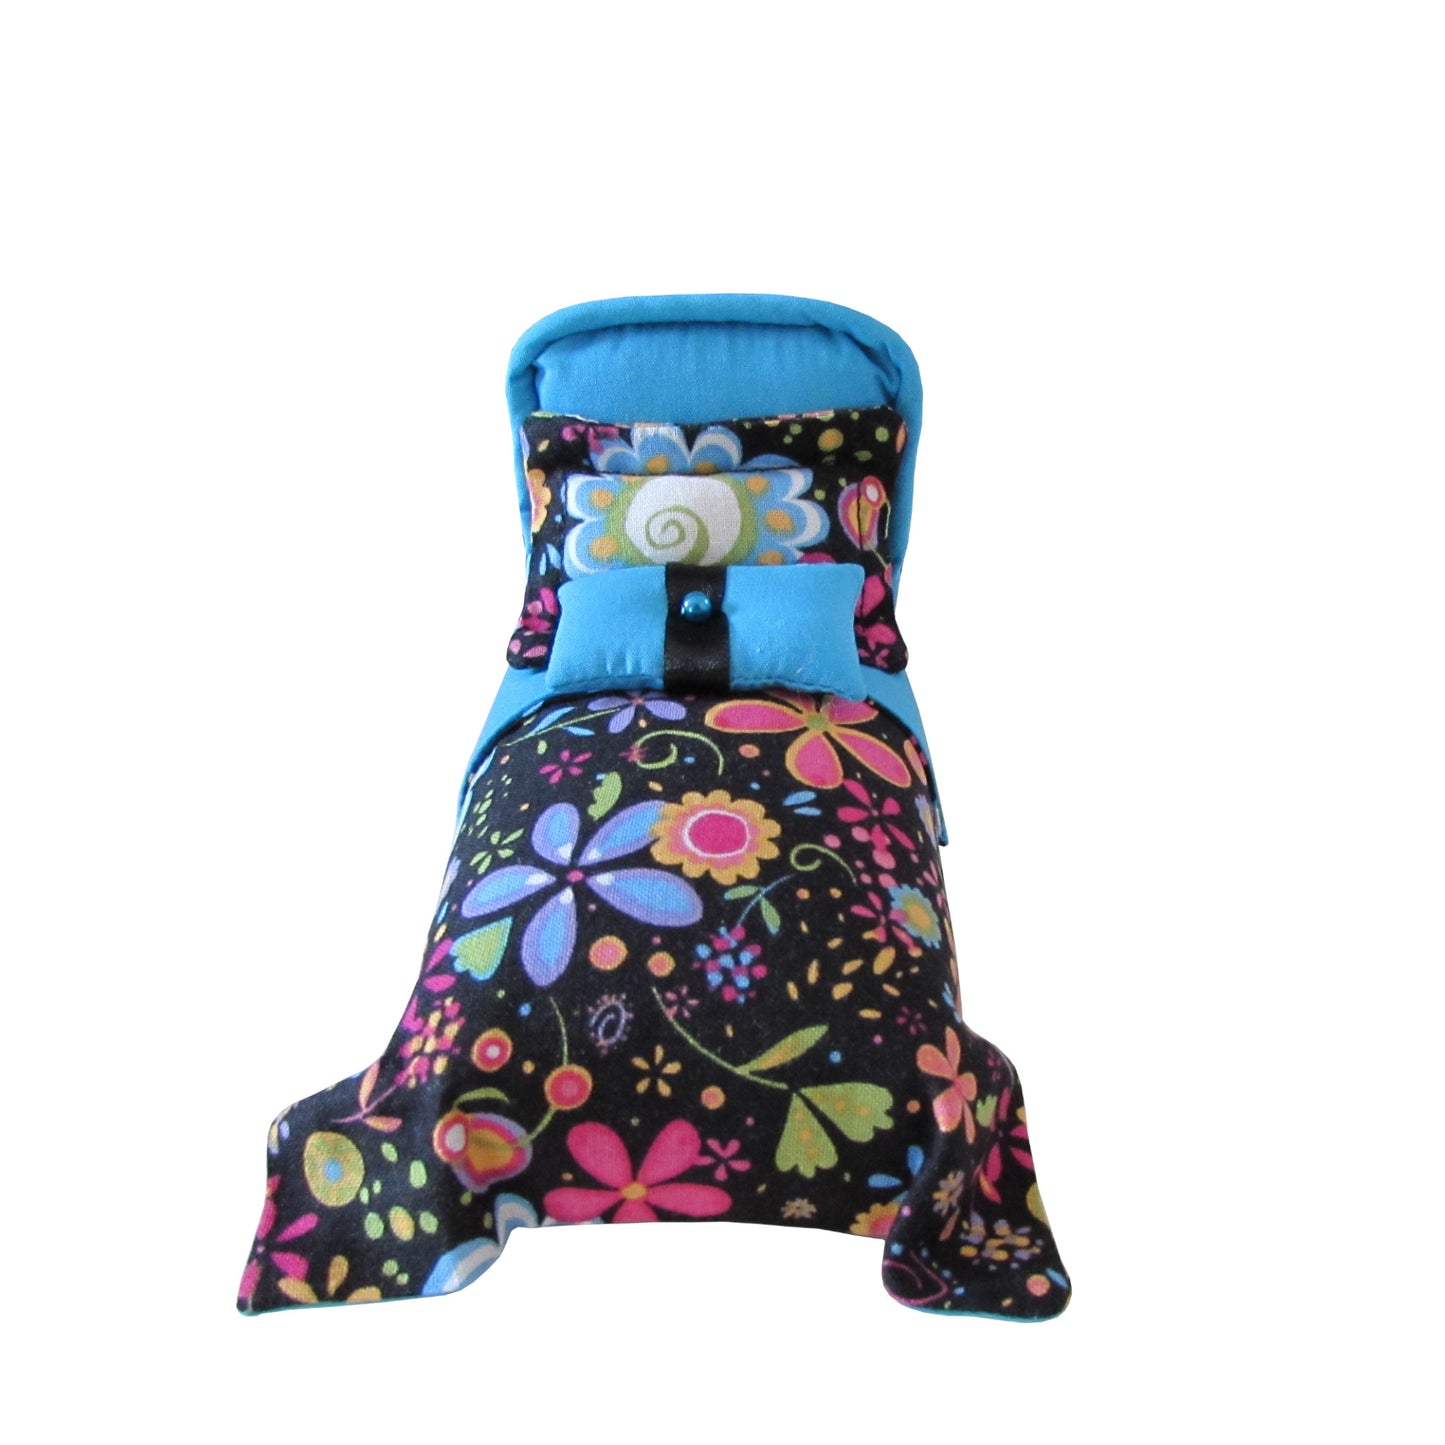 Turquoise Pincushion Bed with Floral Bedding